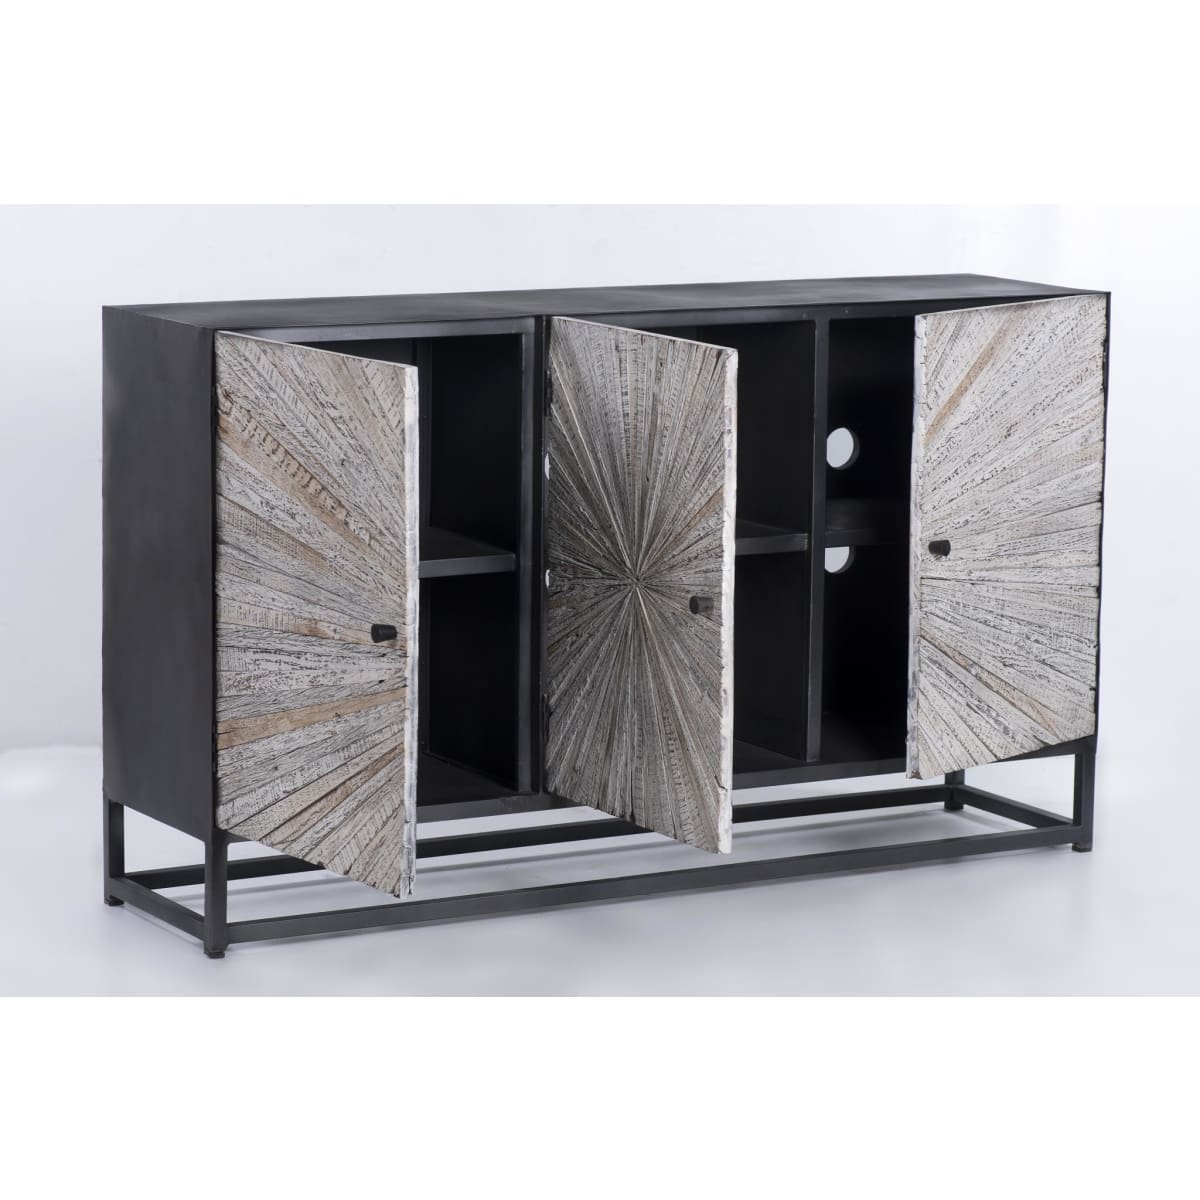 Astral Plains Reclaimed 3 Door Accent Cabinet-Grey Wash - 59X15X34 - accent cabinet